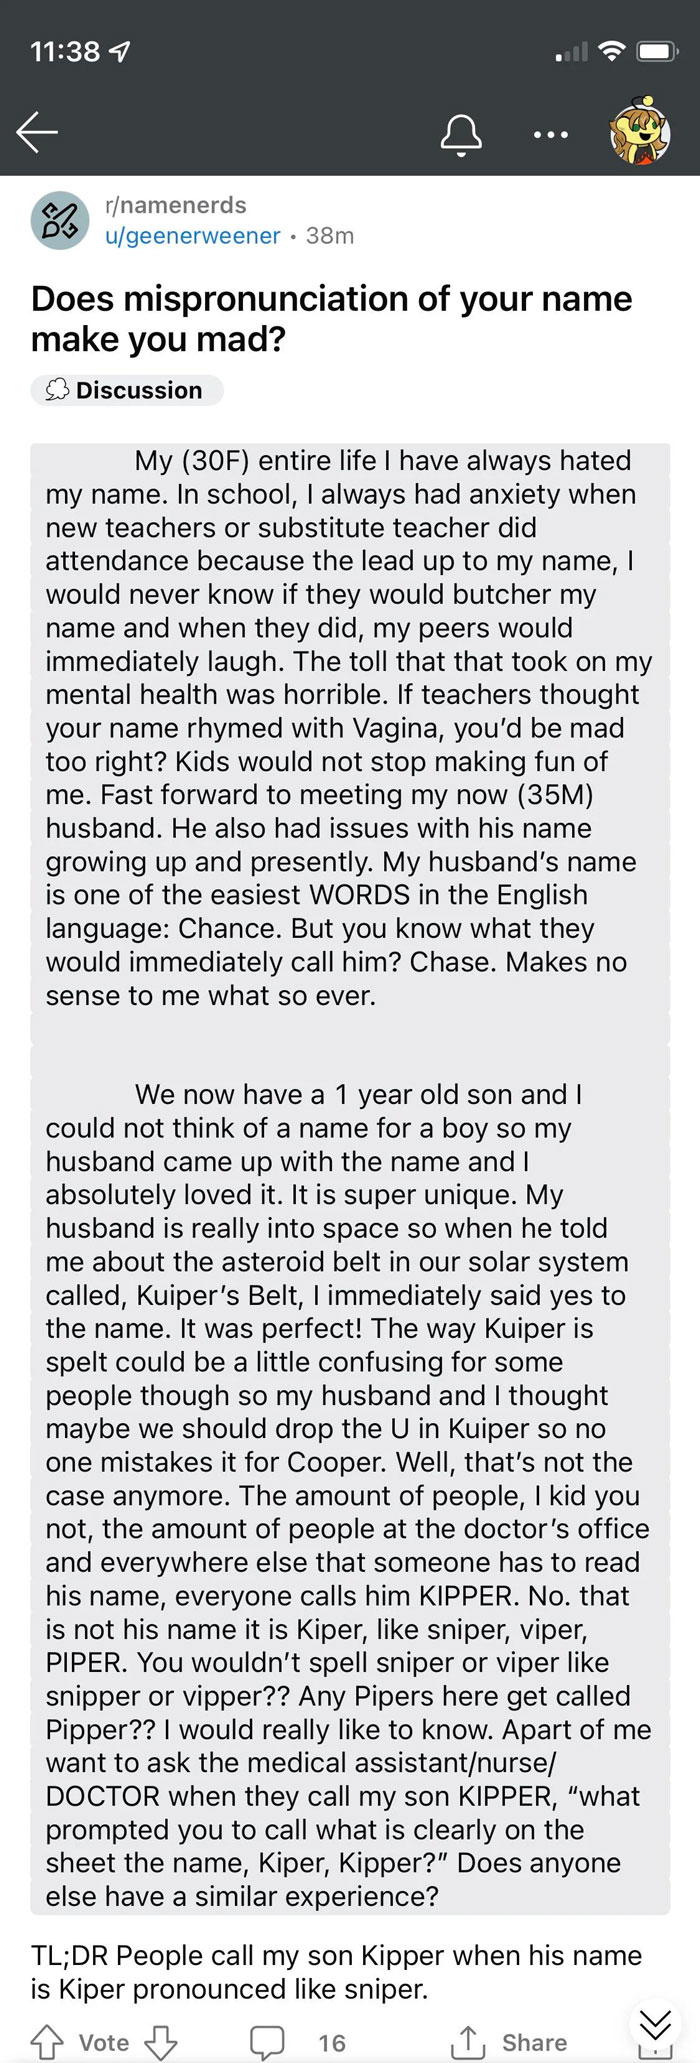 Tl;dr: We Pulled A Name Out Of Our Collective A** For Our Kid And Are Outraged That People Mispronounce It